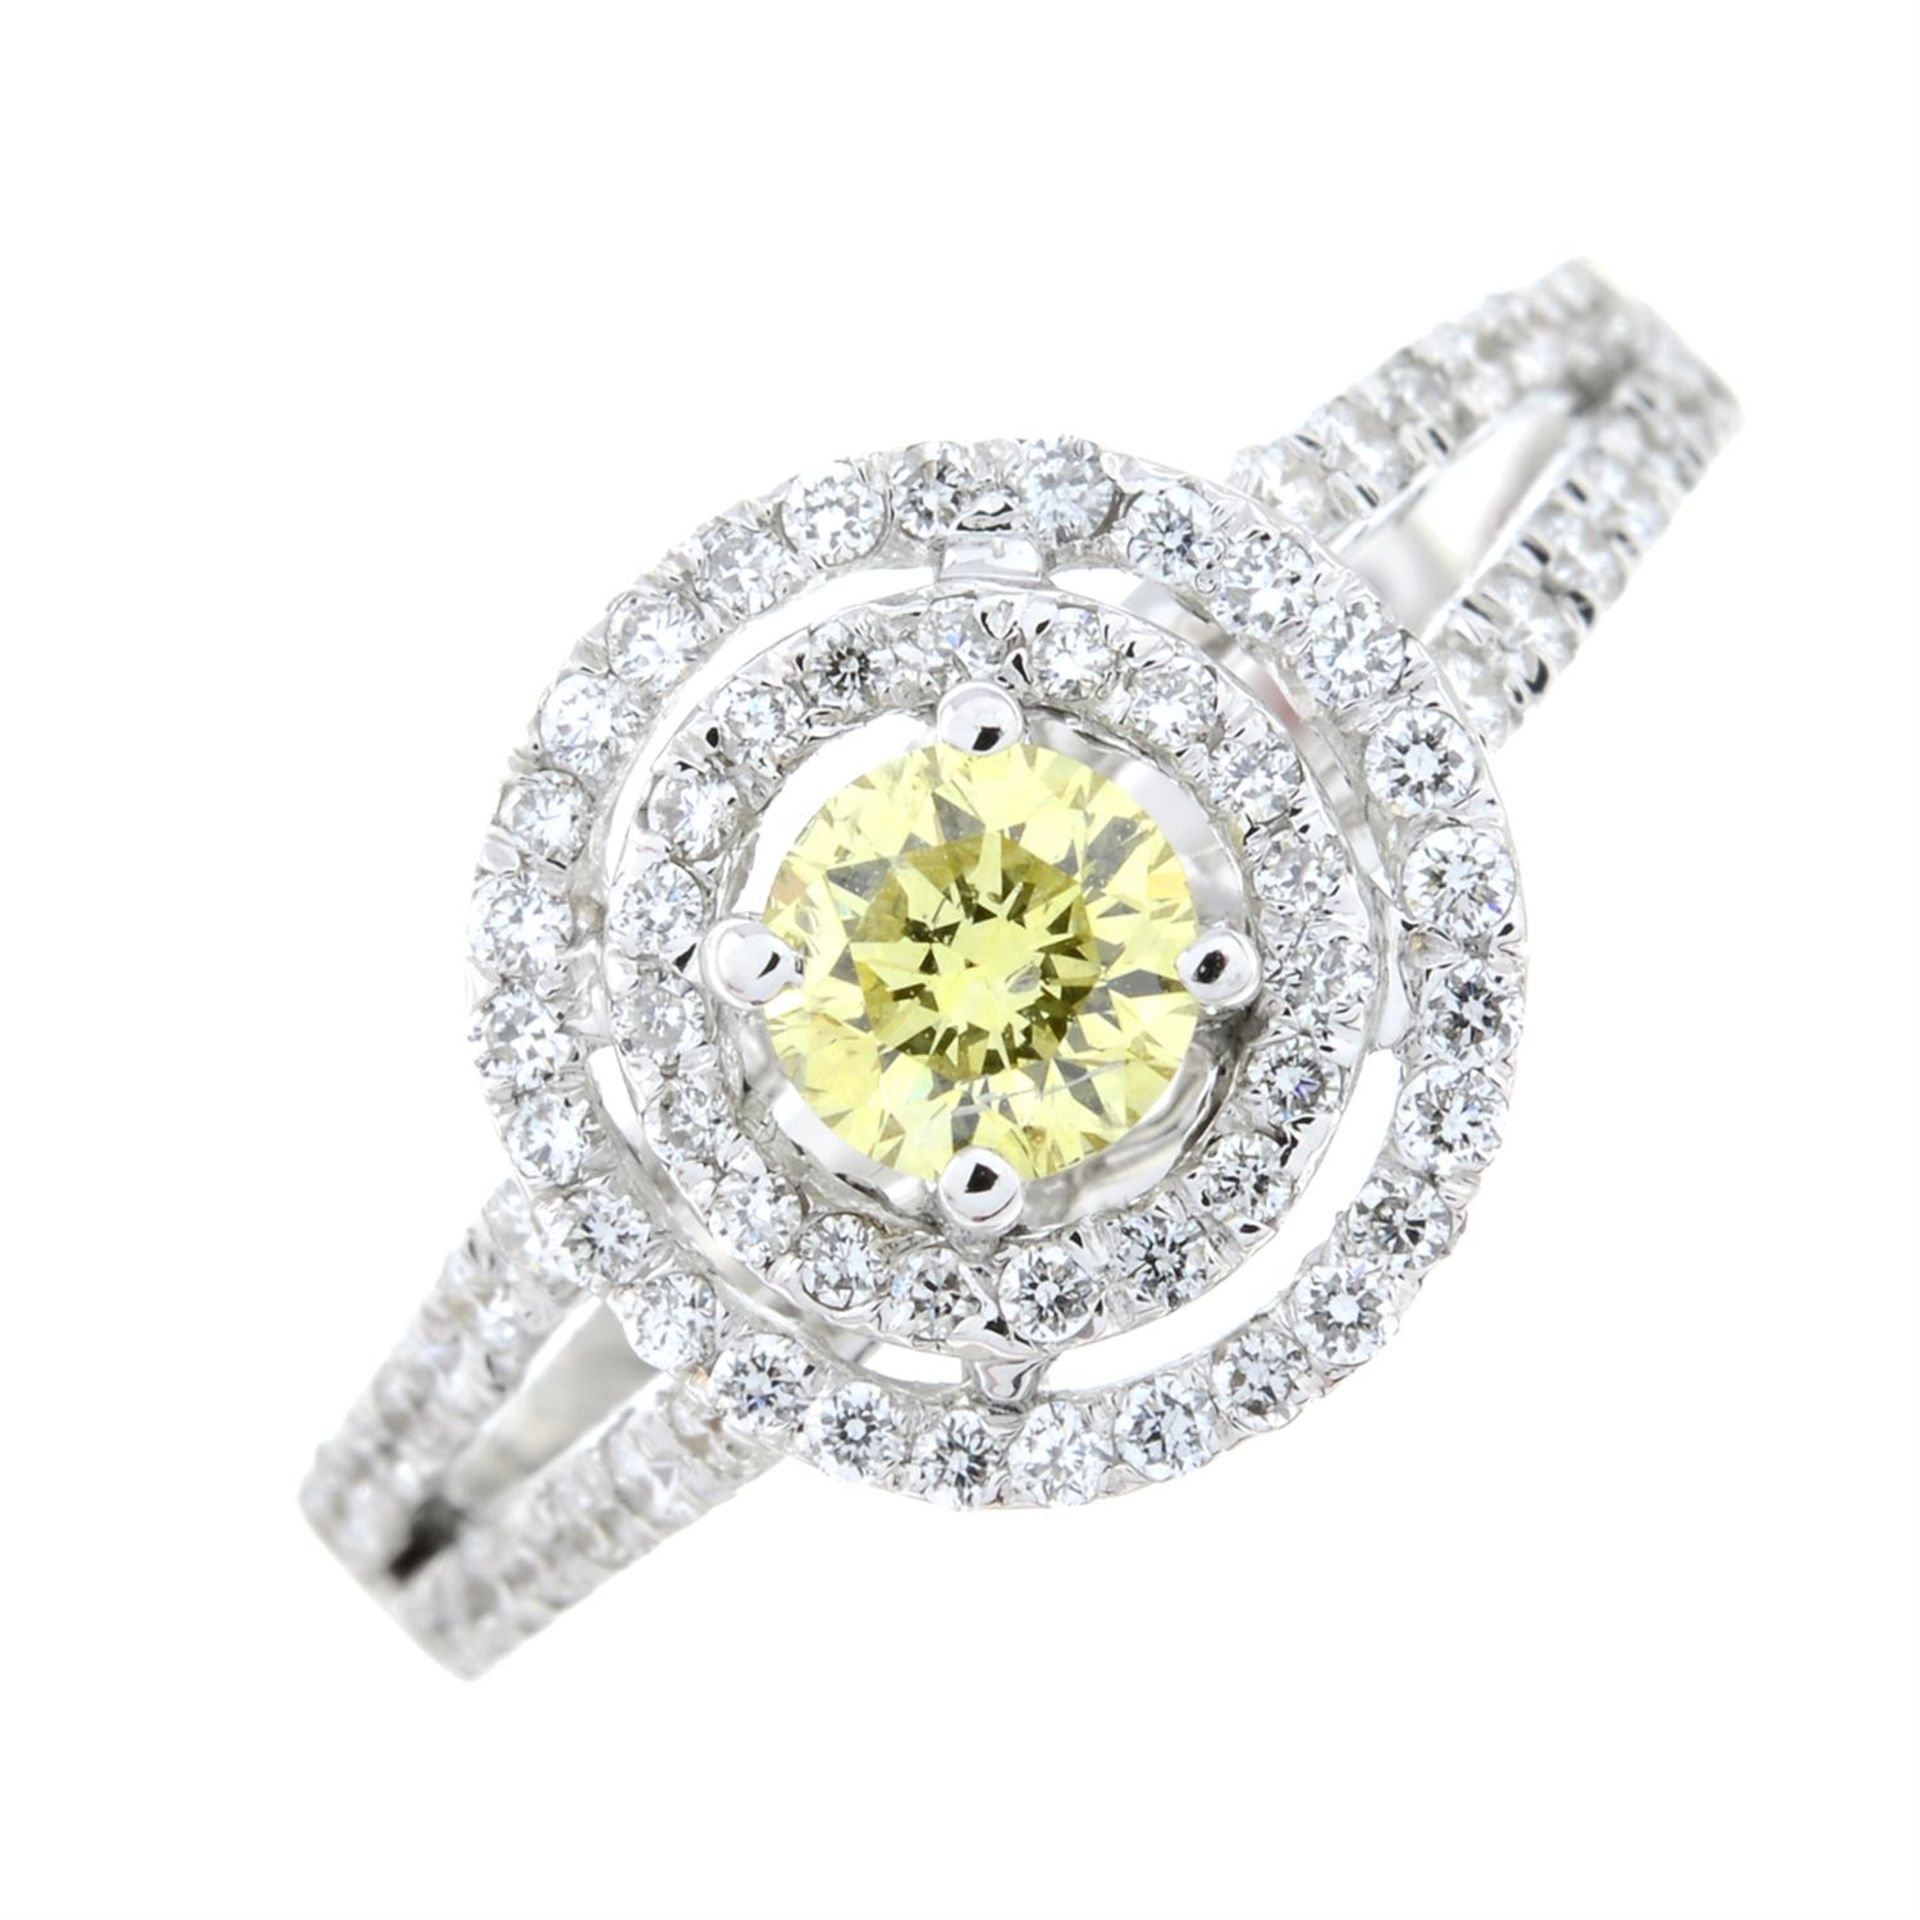 A colour-treated 'yellow' brilliant-cut diamond and diamond cluster ring.